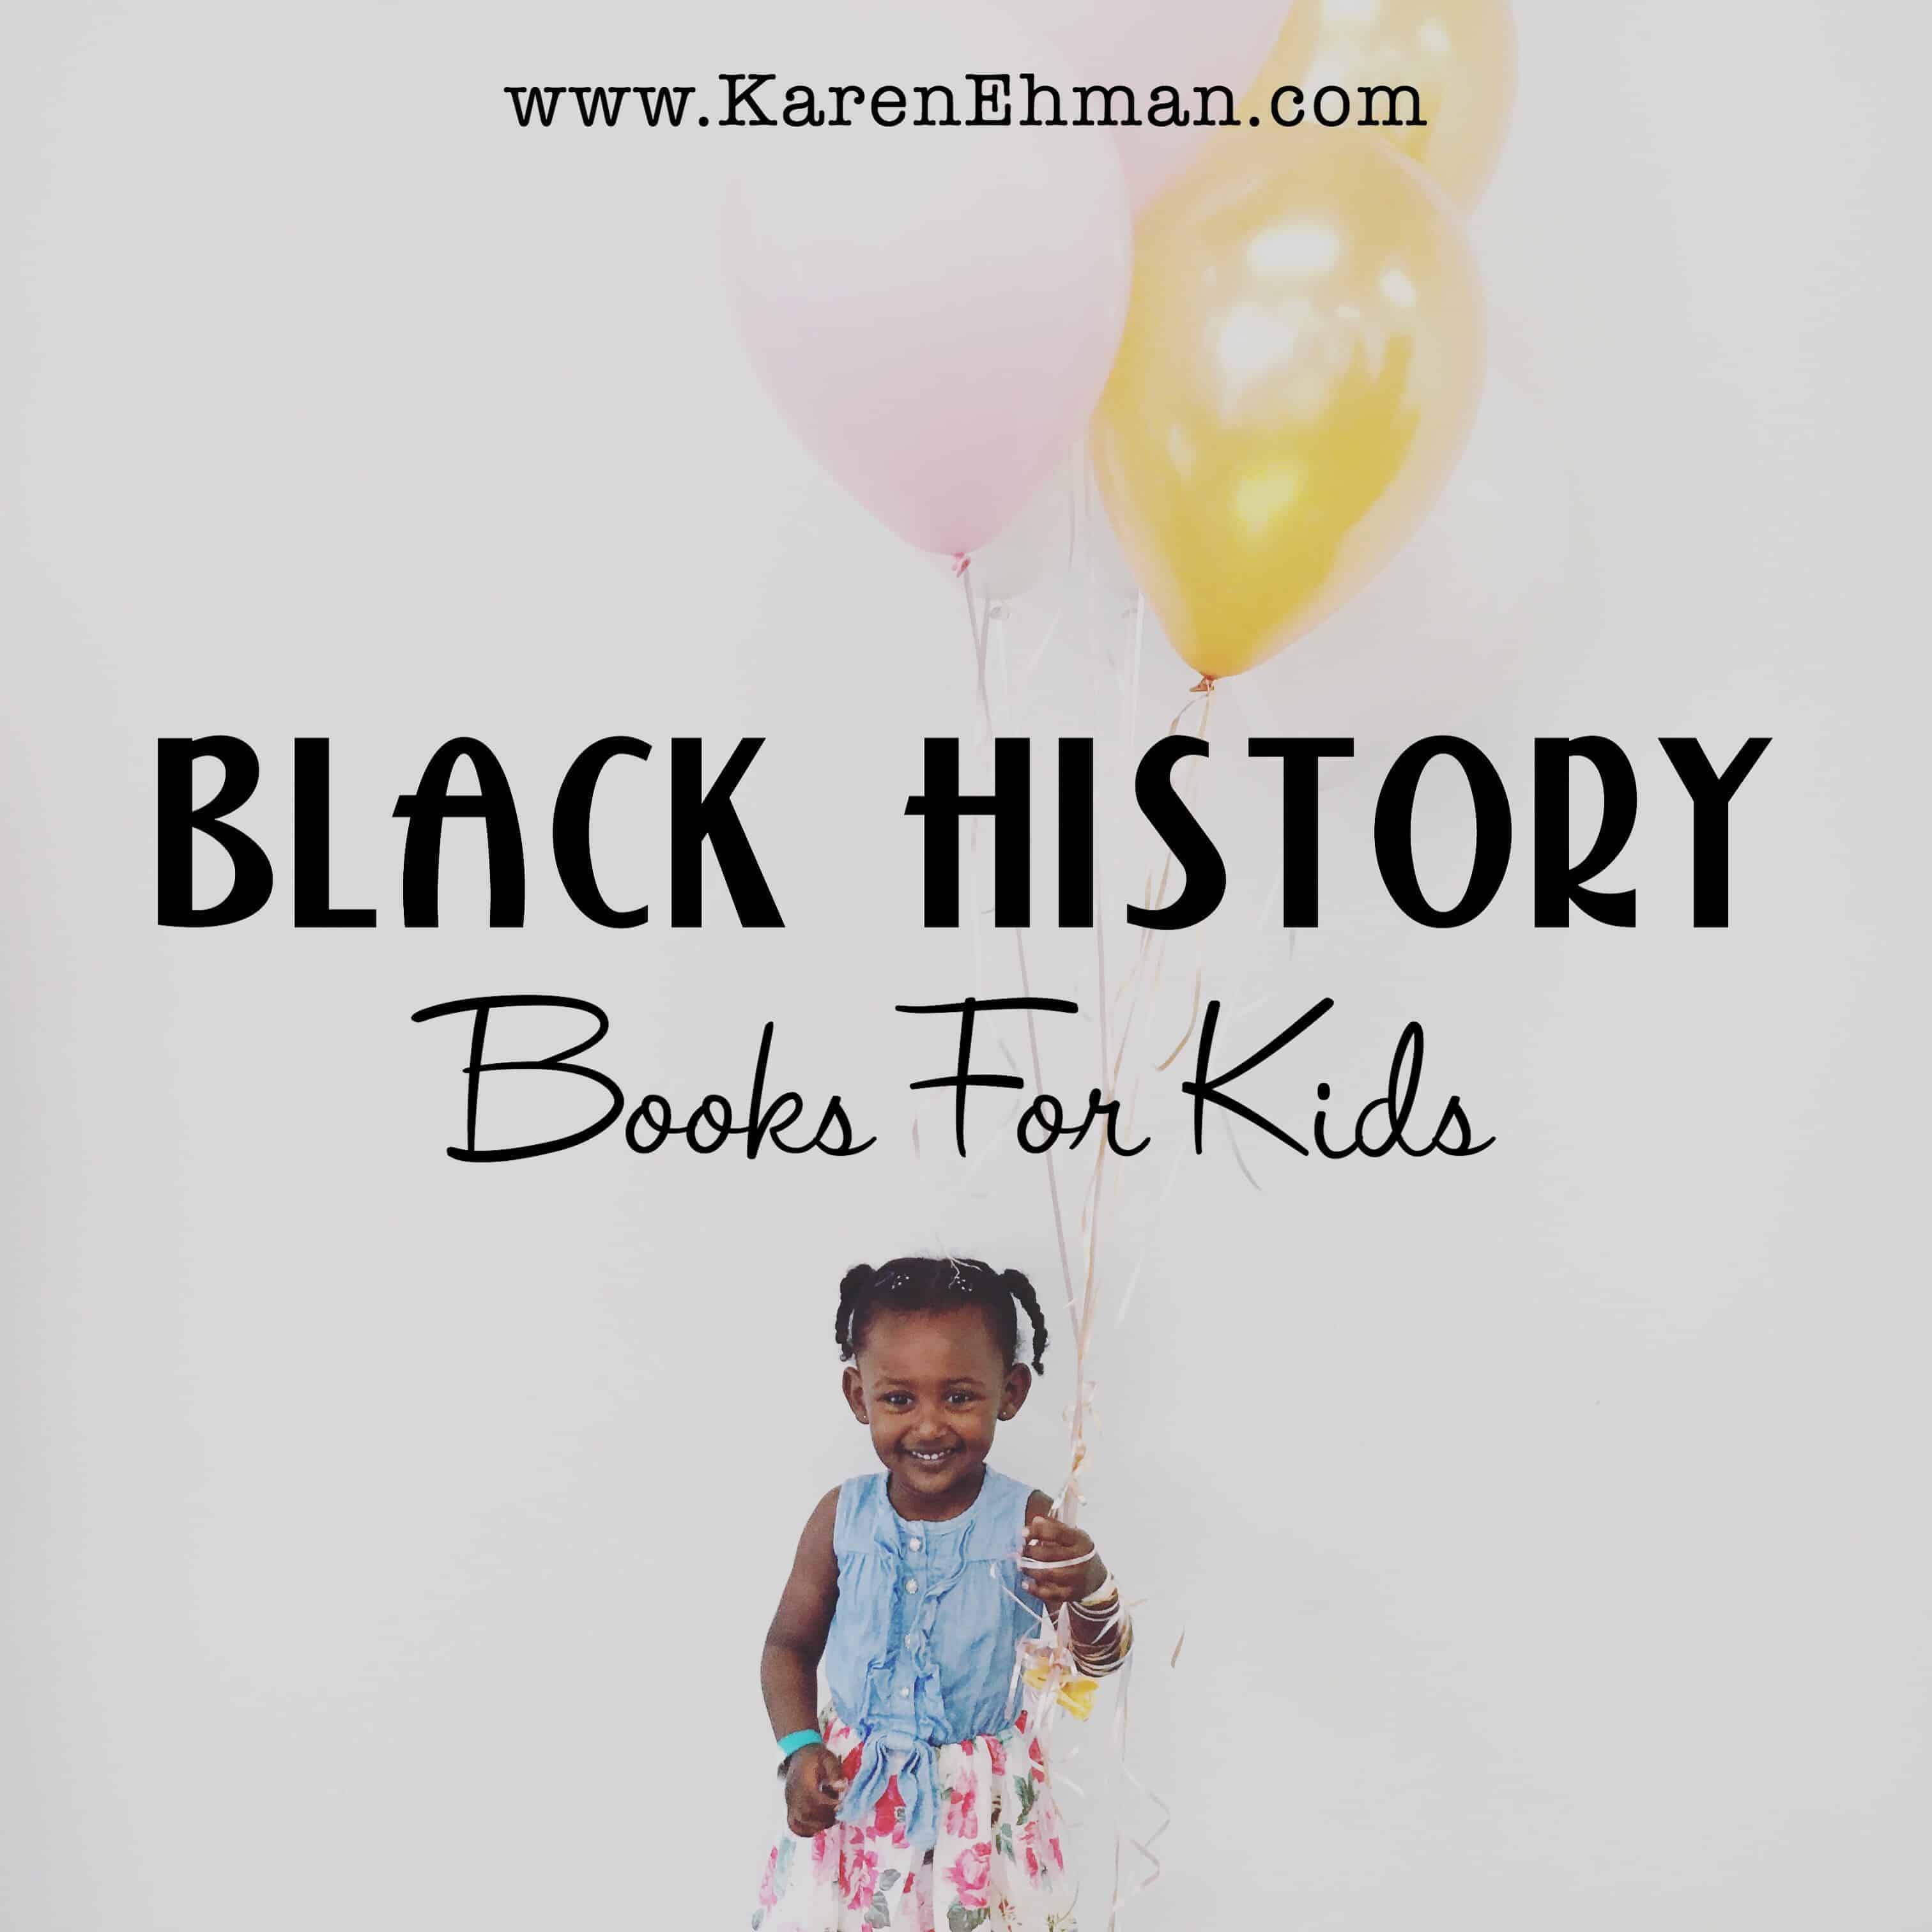 Six family favorites to read with your children for #blackhistorymonth at karenehman.com.